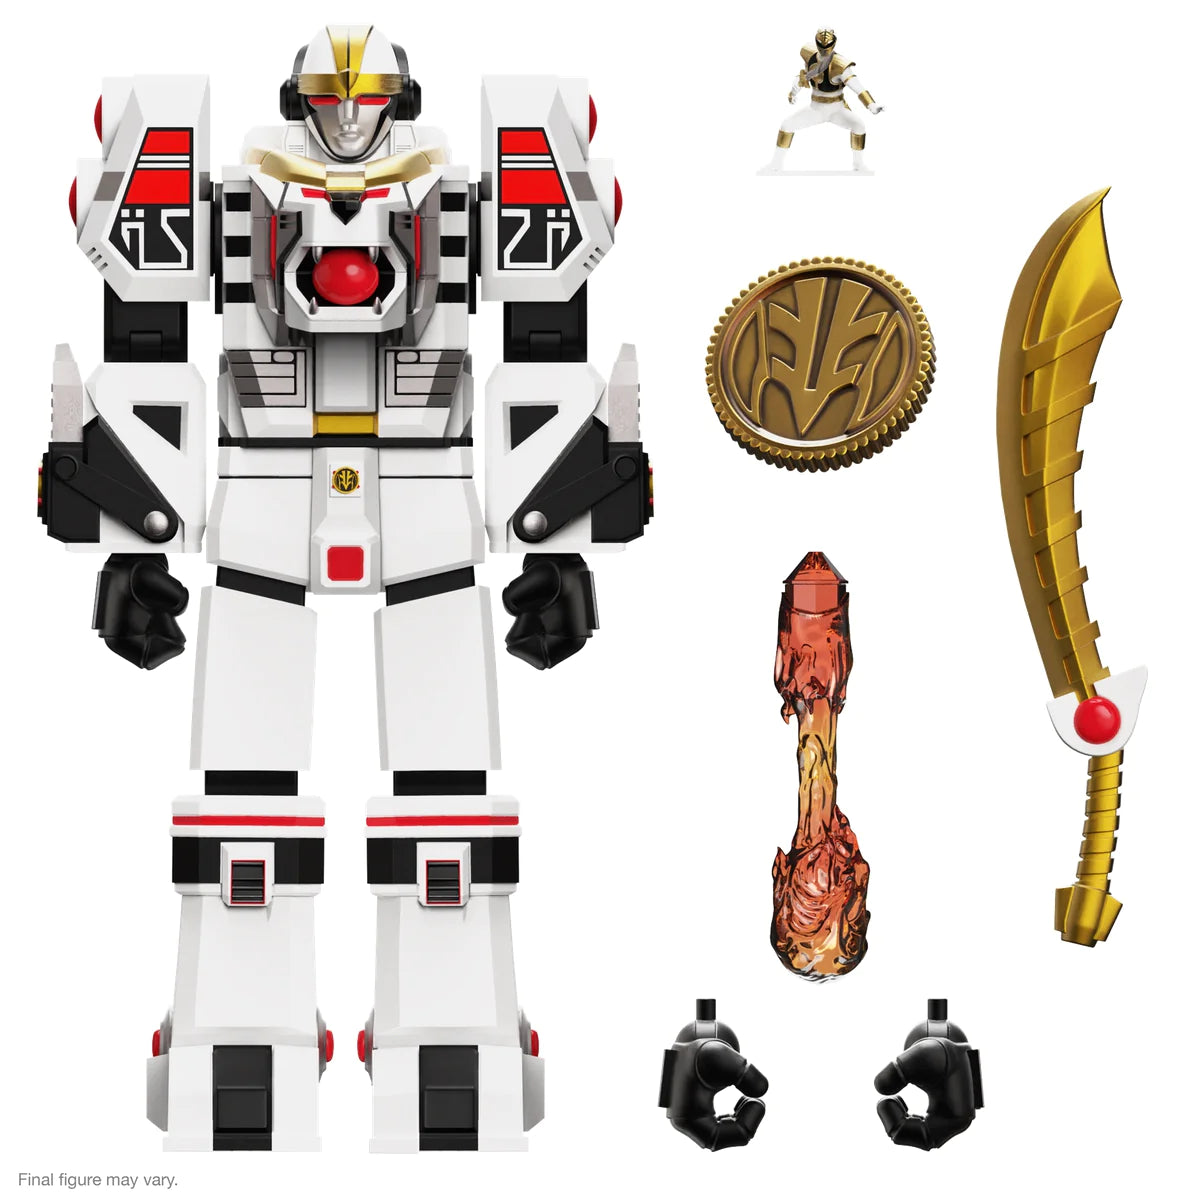 Super7 - Mighty Morphin Power Rangers ULTIMATES! - Wave 4 - White Tigerzord (Warrior Mode) - Marvelous Toys